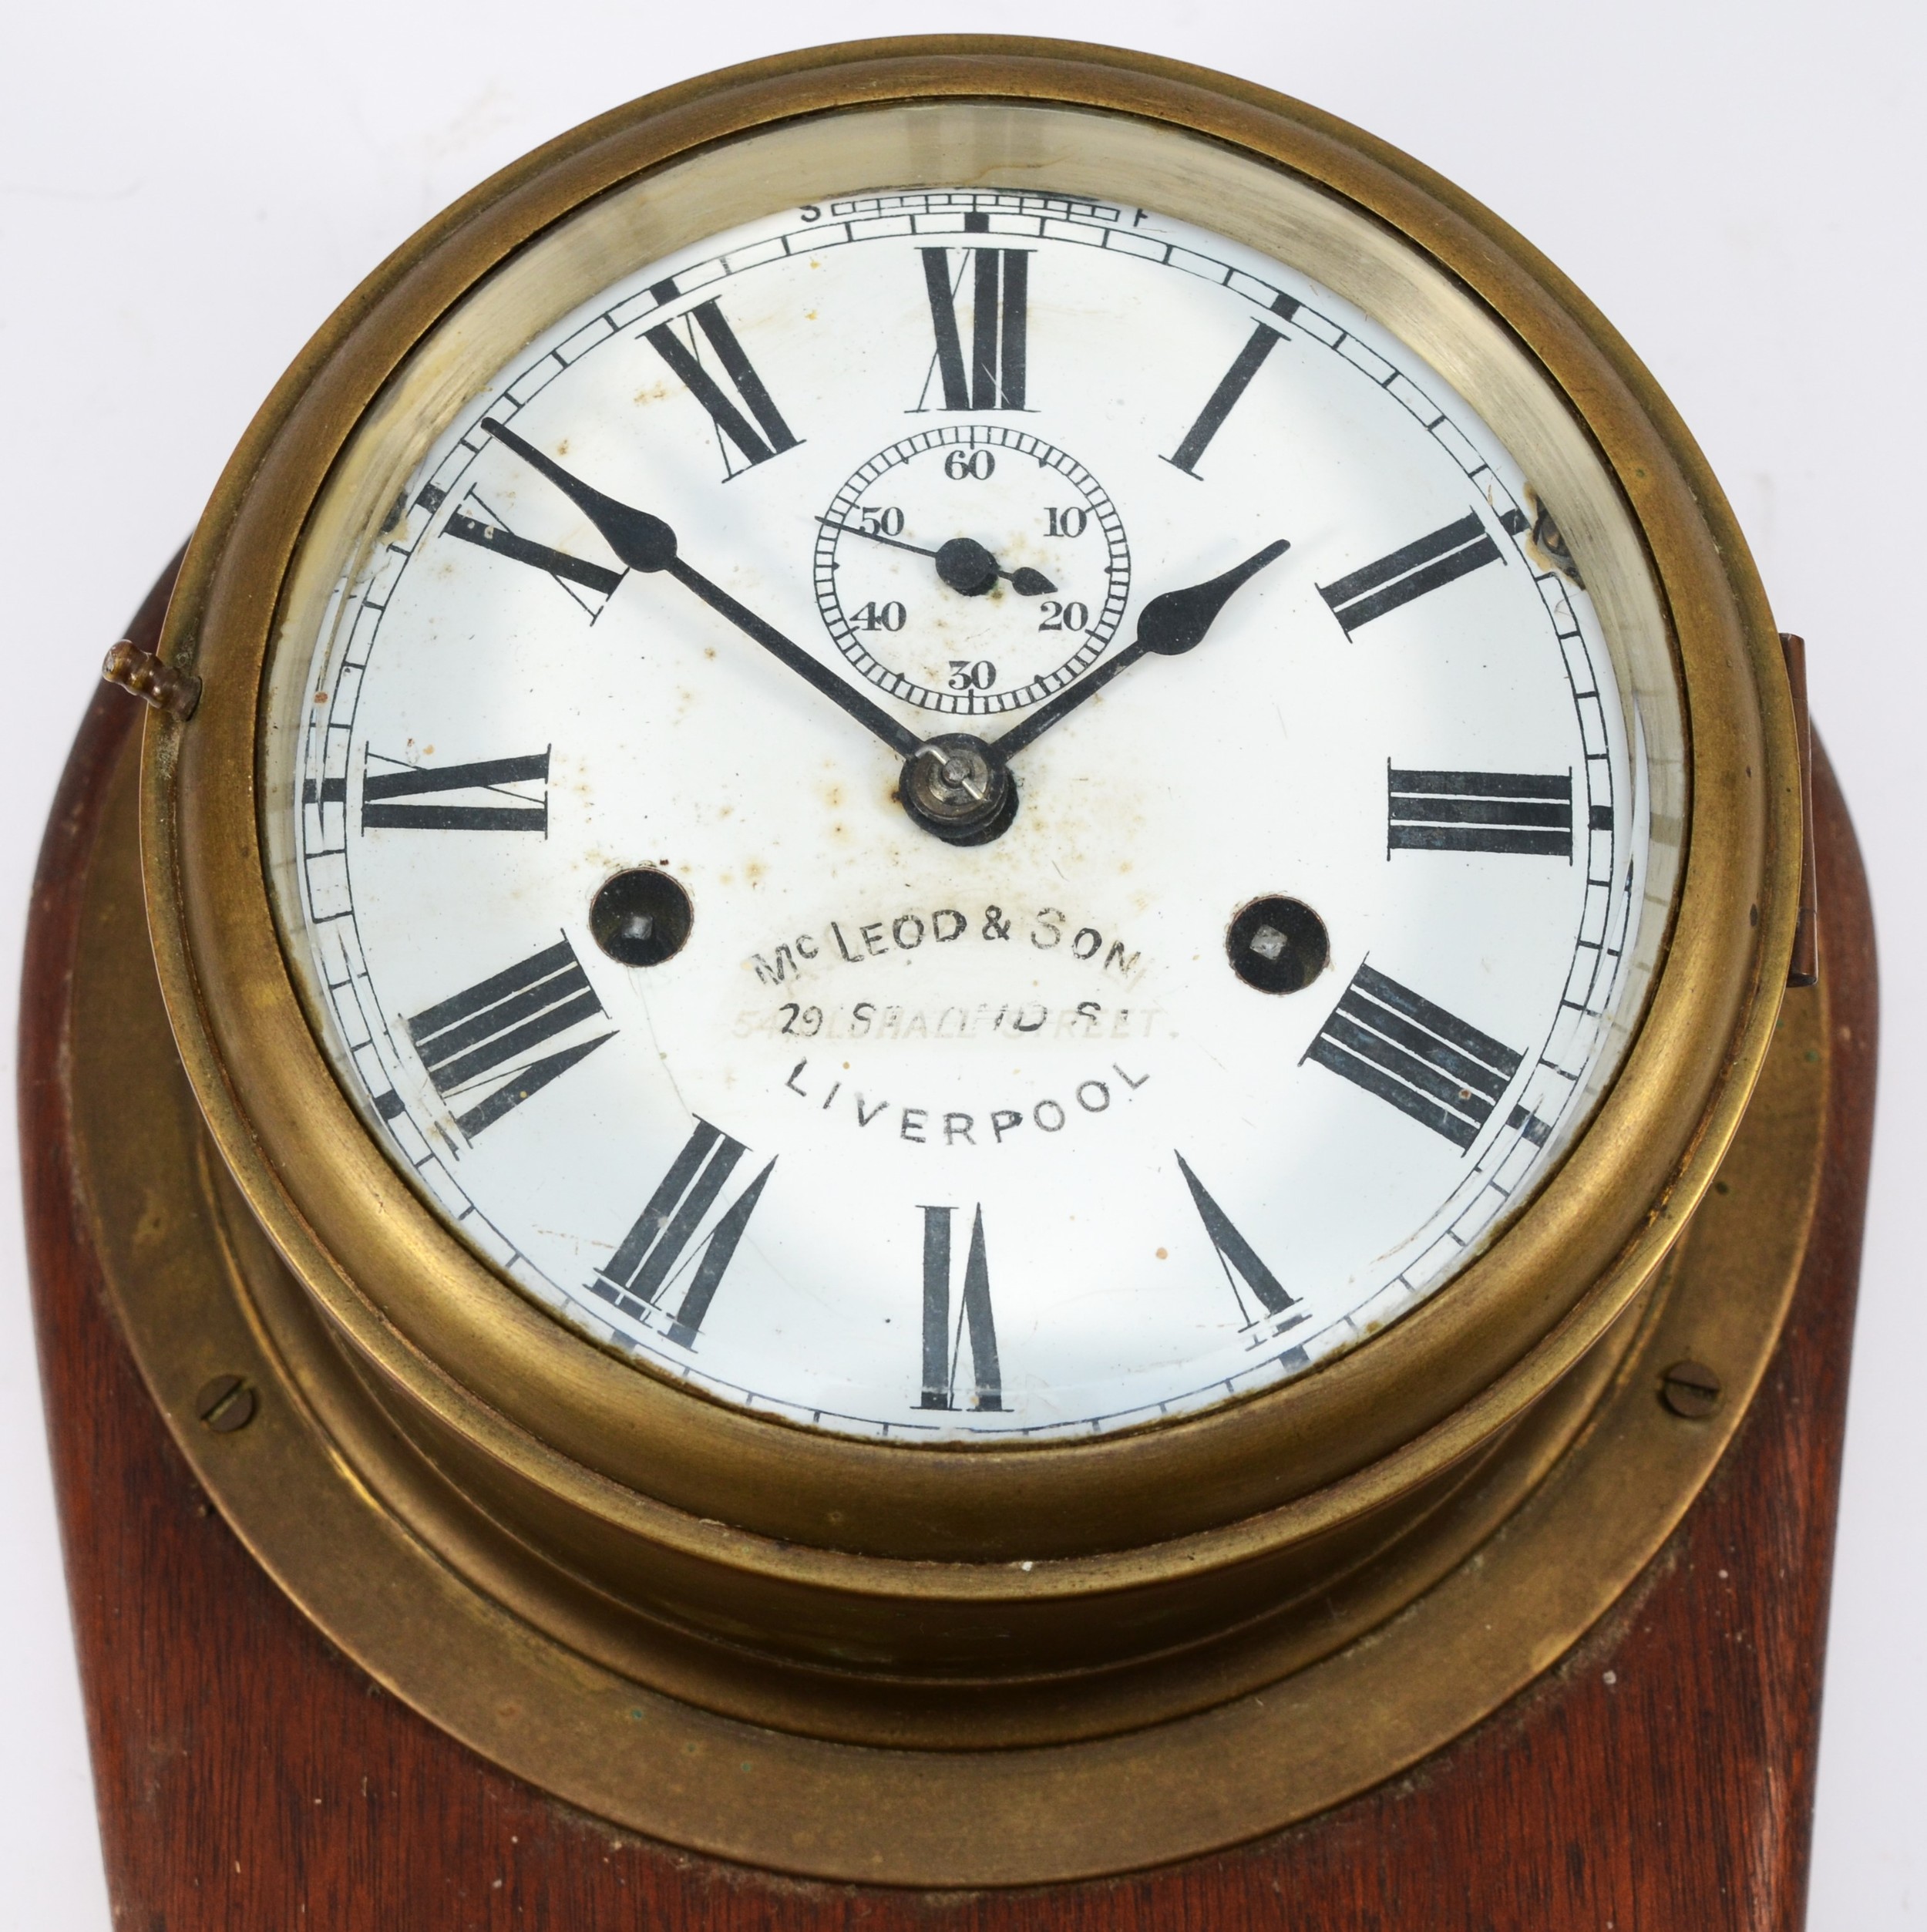 A 20th century combination brass bulkhead clock and barometer, retailed by Mcleod & Son Liverpool, - Image 2 of 3